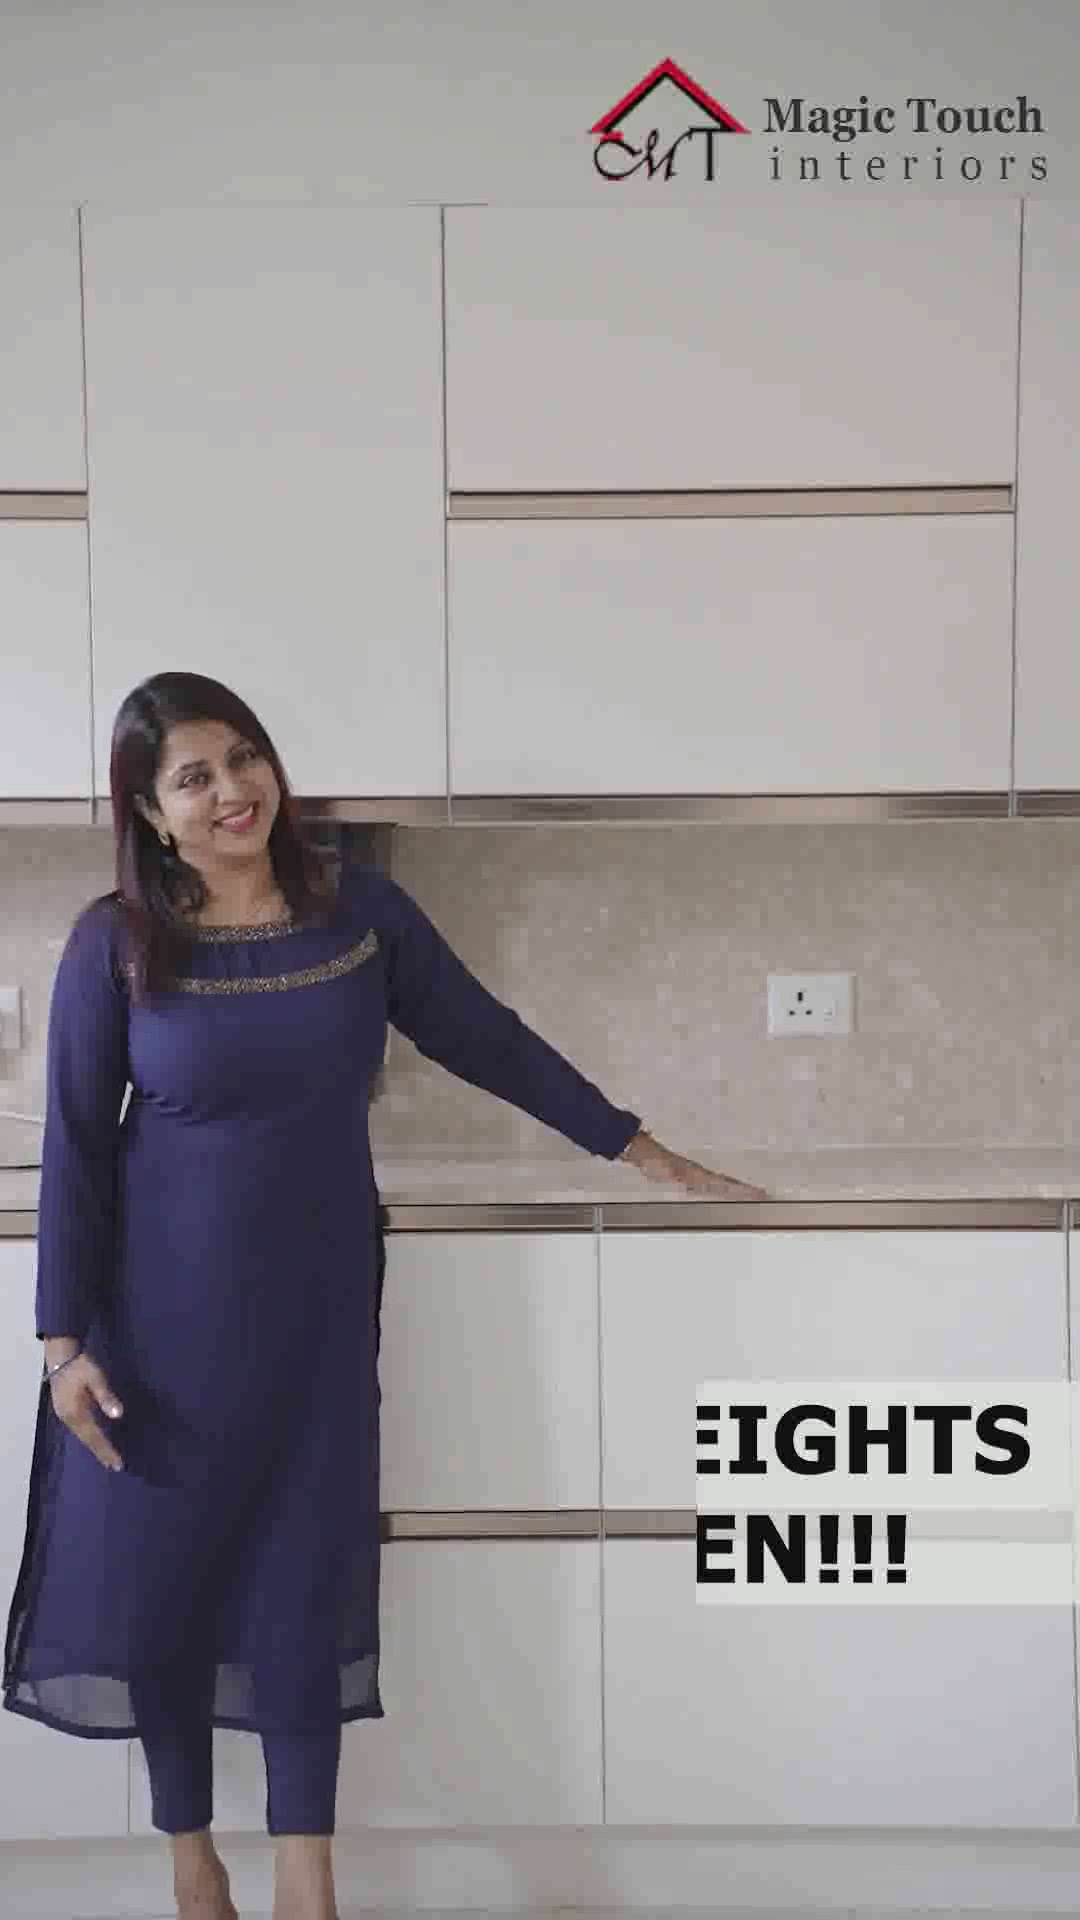 Standard heights for kitchen!!
magictouchinteriors
For more info:
Call Us: +91 99954 29399
E-mail: mail@magictouchinteriors.in
https://magictouchinteriors.in/
Our Address:
19/299-W9, Block number 24 , Vymeethi Road,Thrippunithura , Kochi-682301
Types of Interior Design Styles
✦ Modern Interior Design
✦ Industrial Interior Design
✦ Indian Interior Design
✦ Bohemian Interior Design
✦ Contemporary Interior Design
✦ Rustic Interior Design
✦ Minimalist Interior Design
✦ Scandinavian Interior Design
What We Design at Beautiful Homes
✦ Modular Kitchens
✦ Custom Furniture
✦ Furnishings and Décor Items
✦ Wall Paints and Wallpapers
✦ Modular Wardrobes and Cupboards
✦ Lighting
.
.
.
#kitchen #kitchendesign #interiordesign #home #food #homedecor #design #interior #cooking #kitchendecor #decor #k #chef #foodie #homedesign #architecture #foodporn #bathroom #furniture #homesweethome #love #bedroom #renovation #kitcheninspo #instagood #kitchenremodel #kitcheninspiration #instafood #interiors #HouseDes